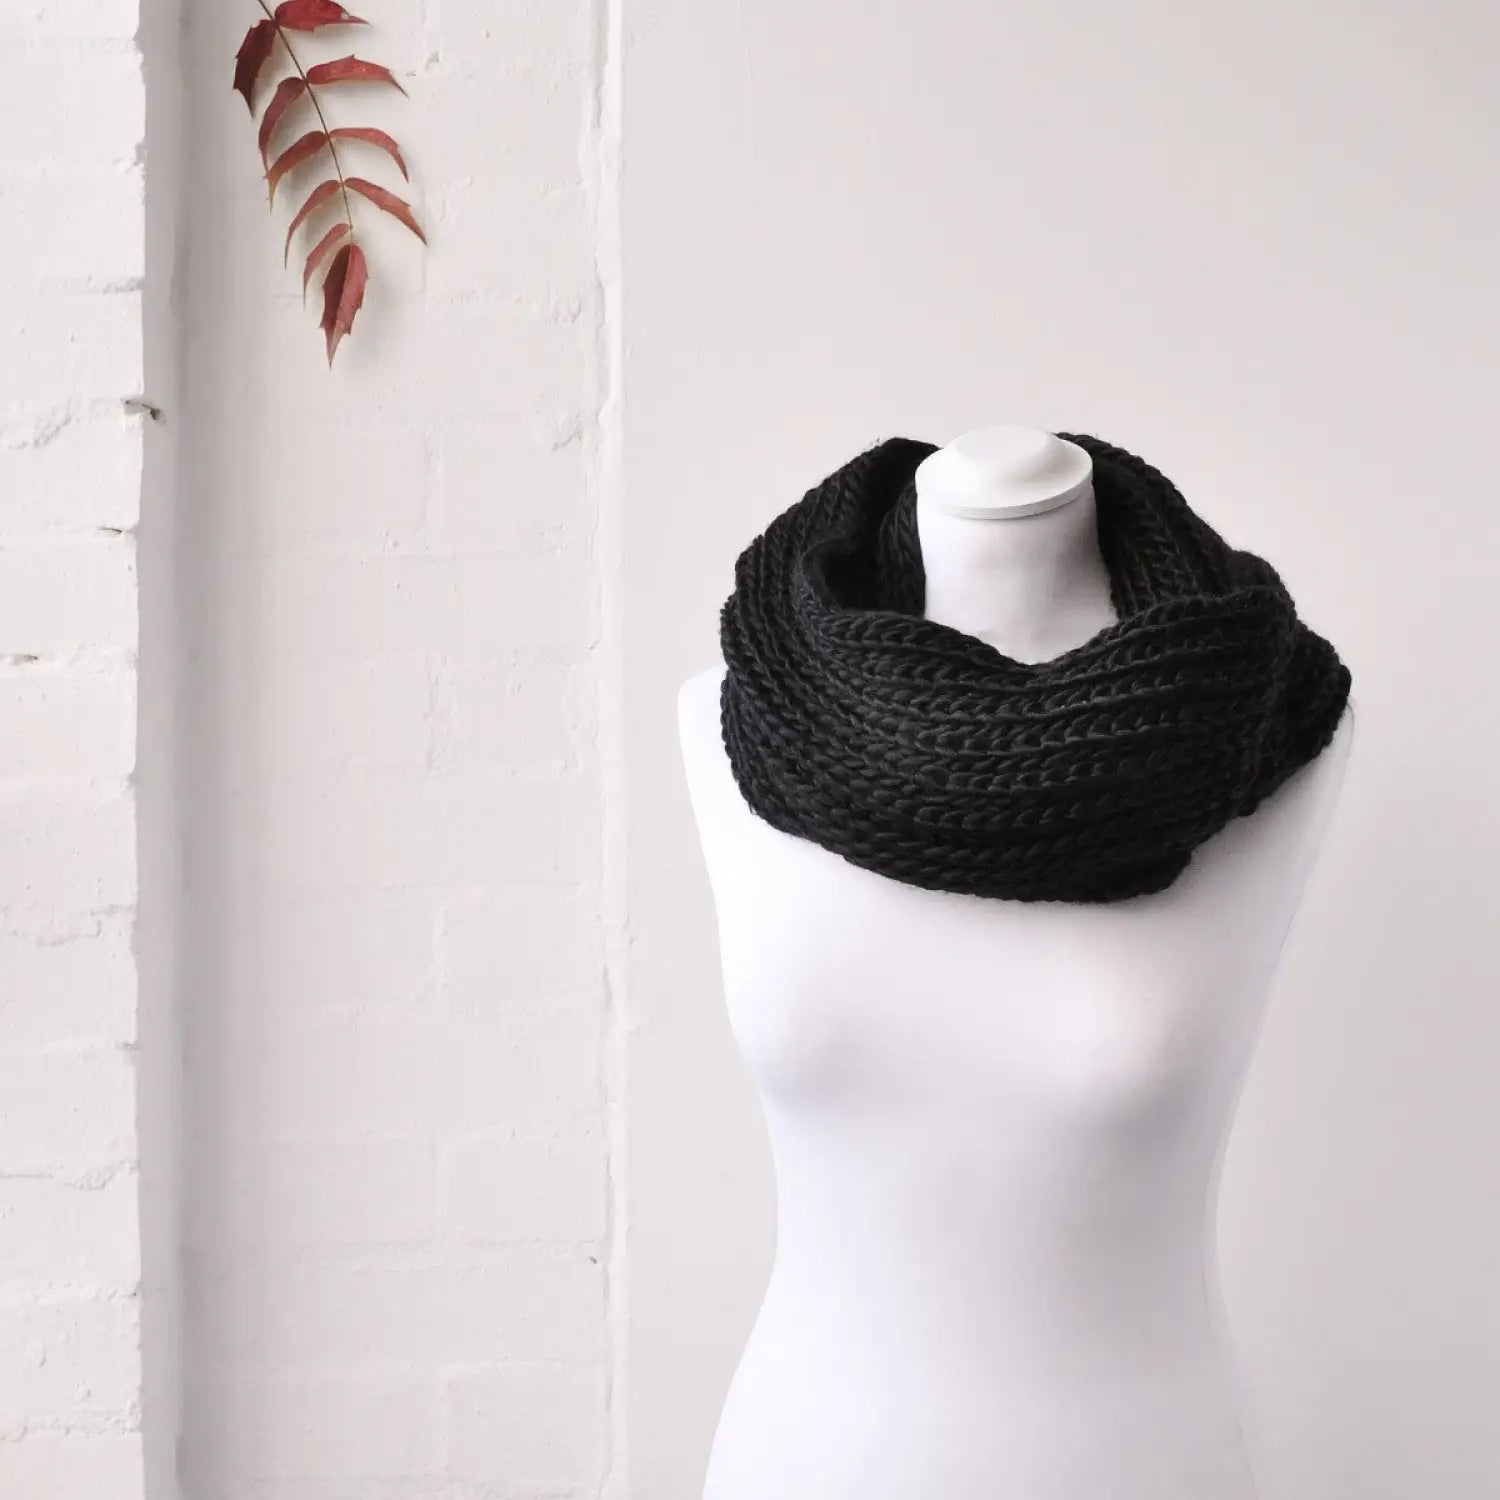 Cozy chunky knit snood on mannequin with black scarf